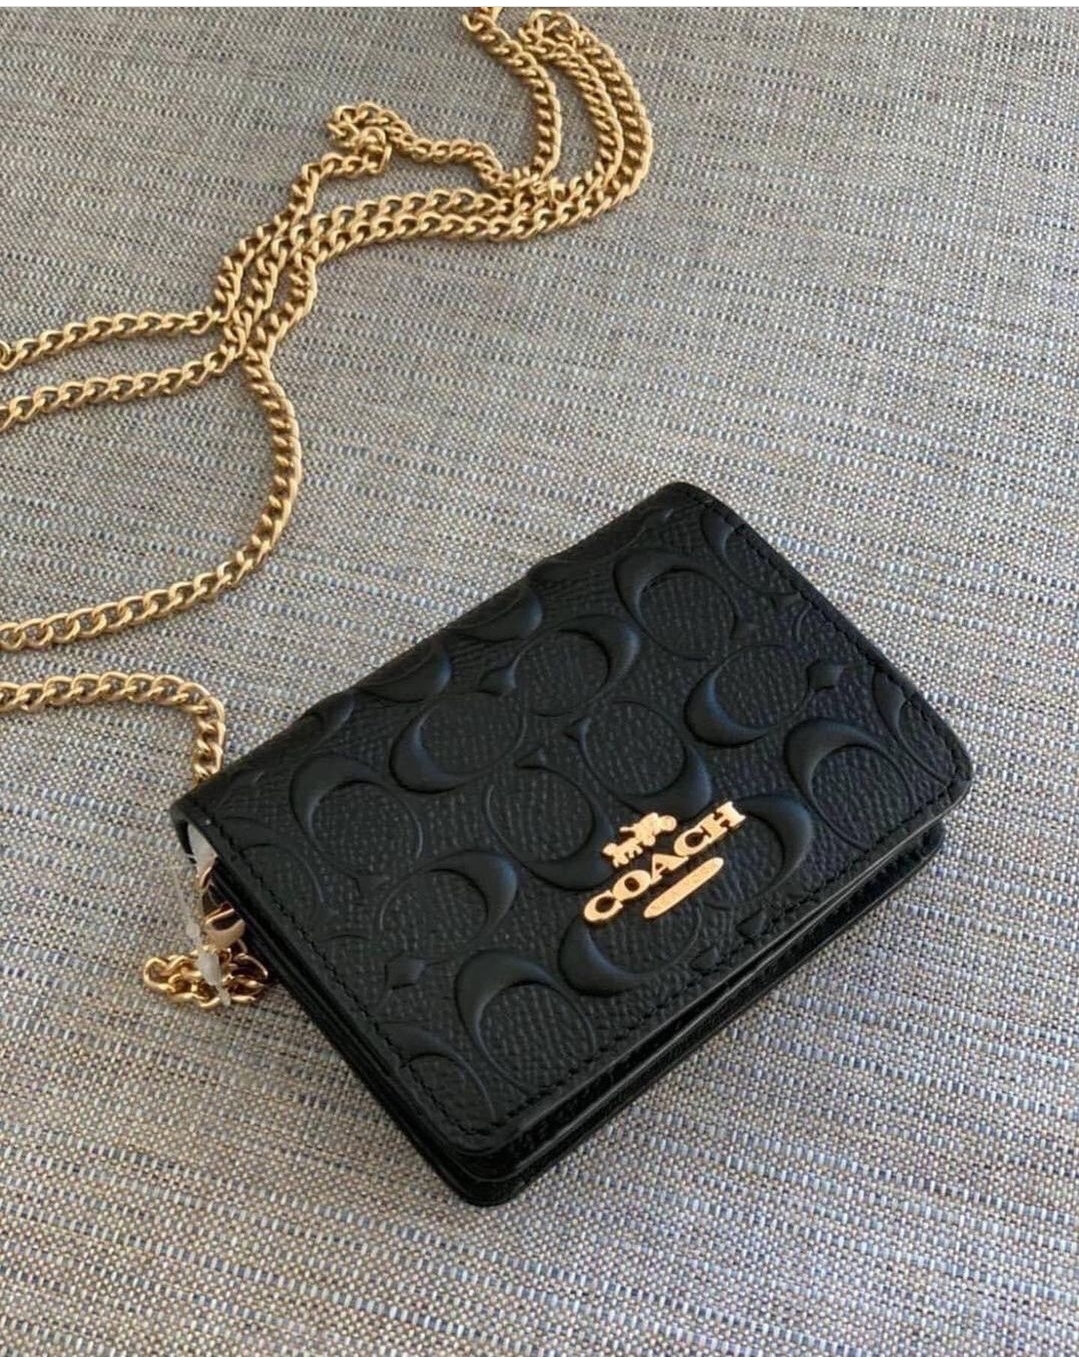 Coach Mini Wallet On A Chain C7316 In Signature Leather - Red